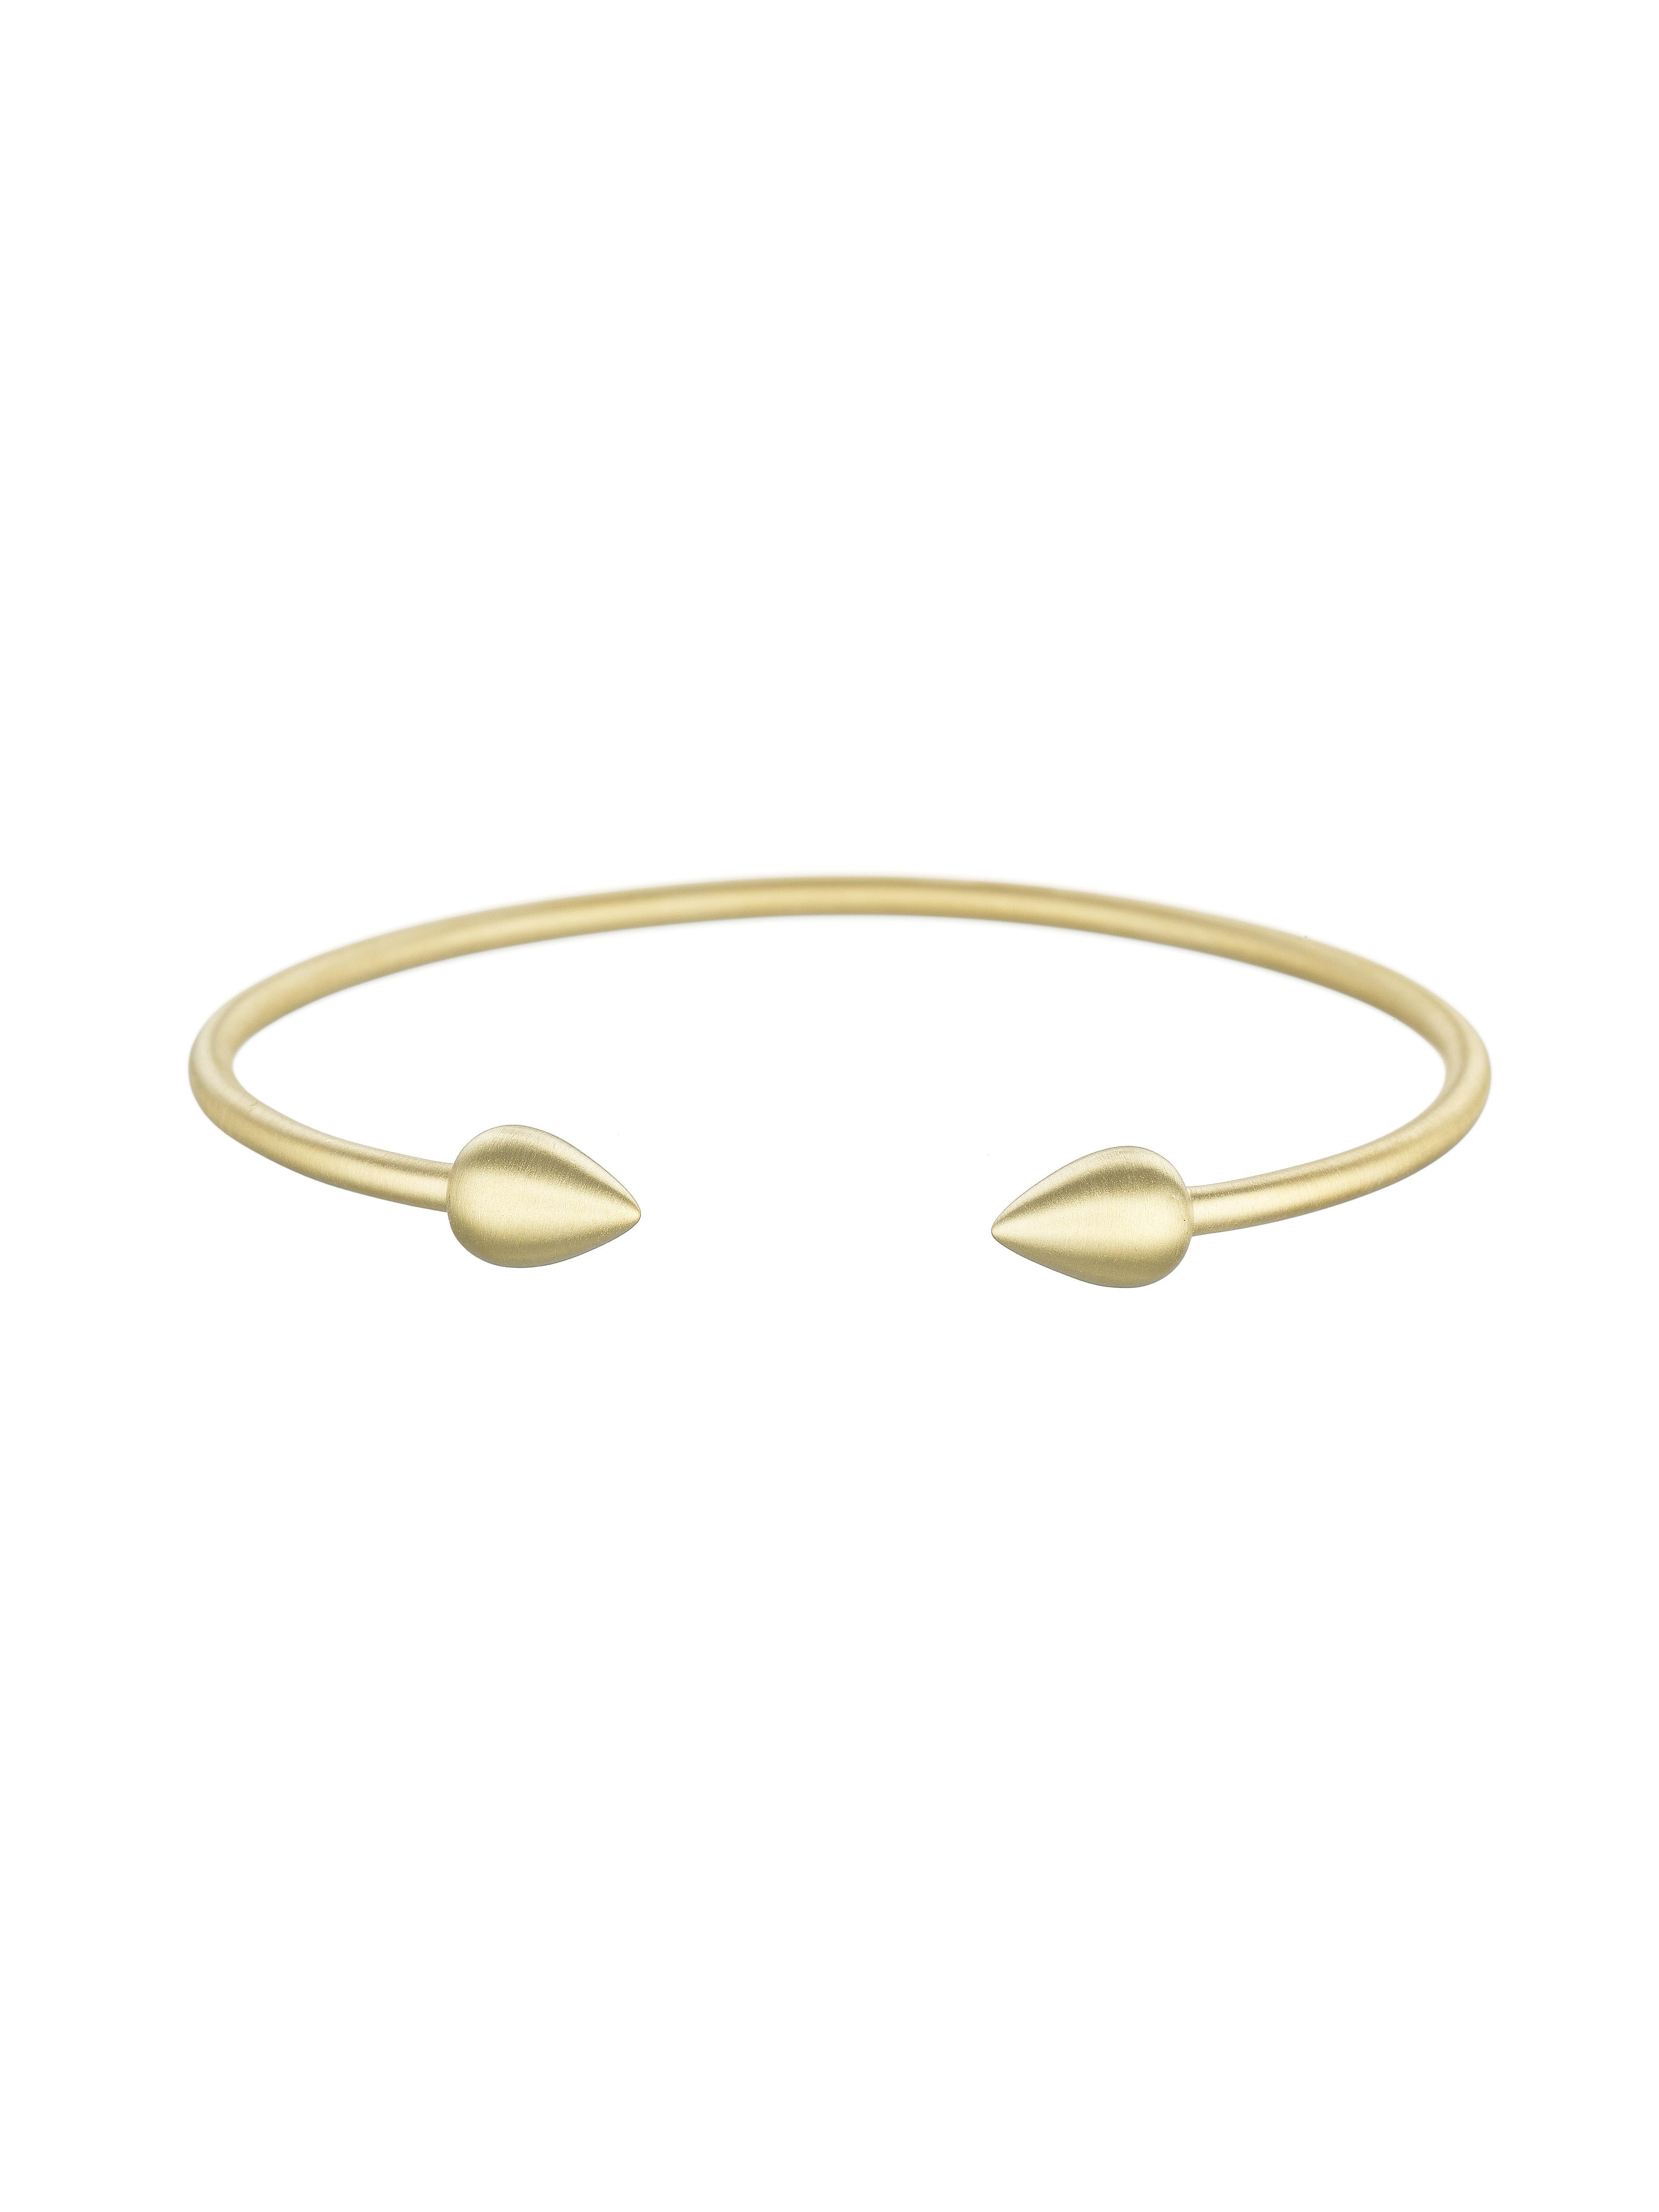 A simple 18 karat gold bangle that will become a such a part of your collection you'll feel naked without it. Available in high polish or satin finish. 